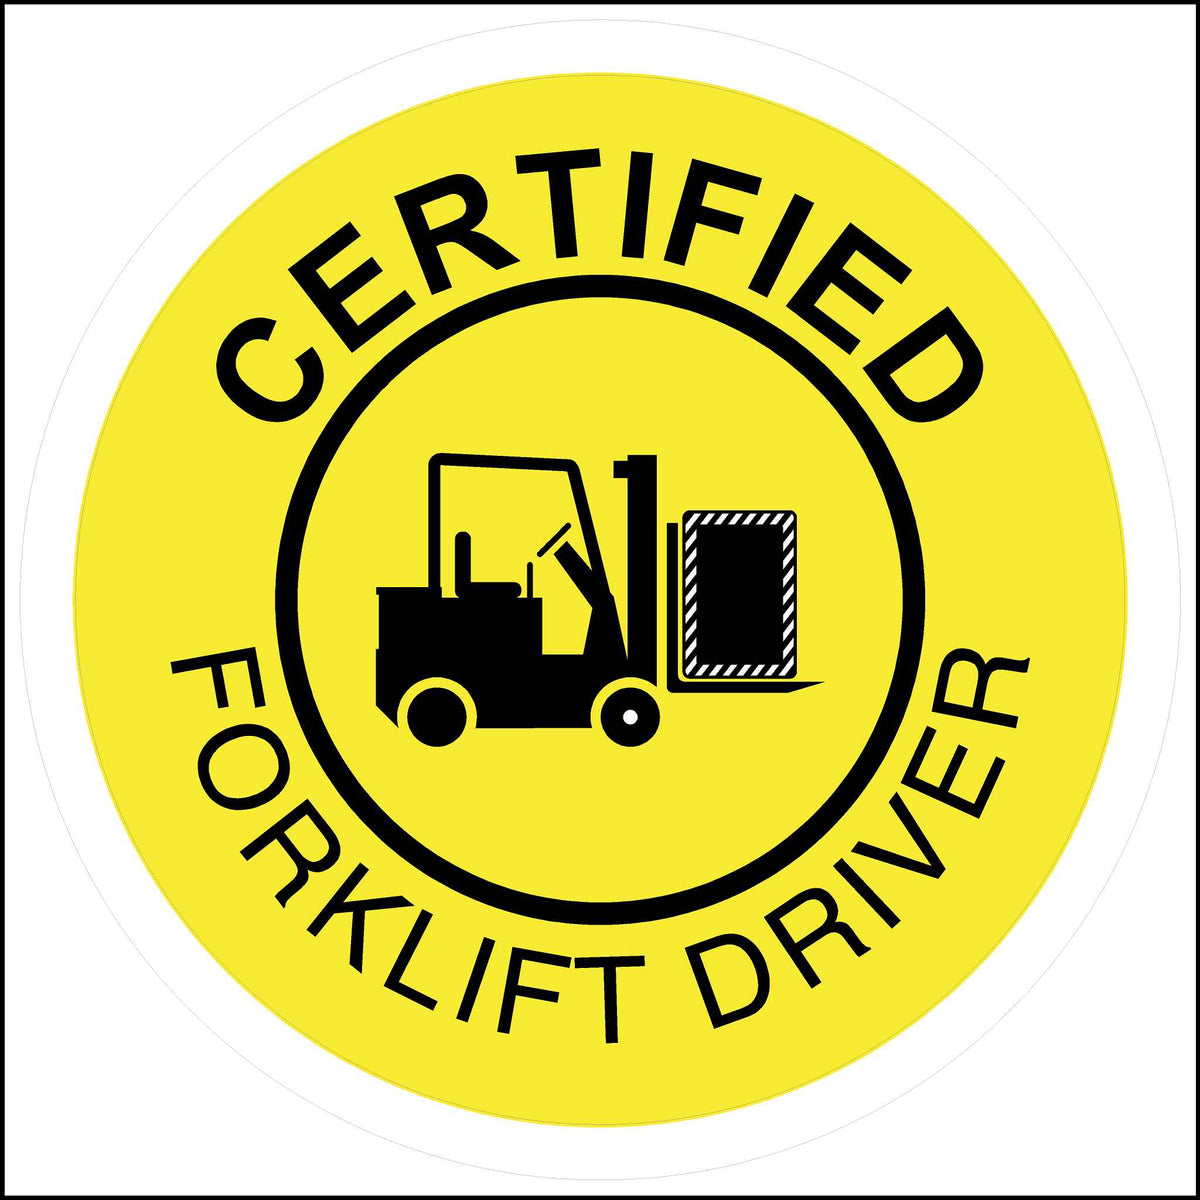 Certified Forklift Driver Hard Hat Decal printed in black with yellow background.